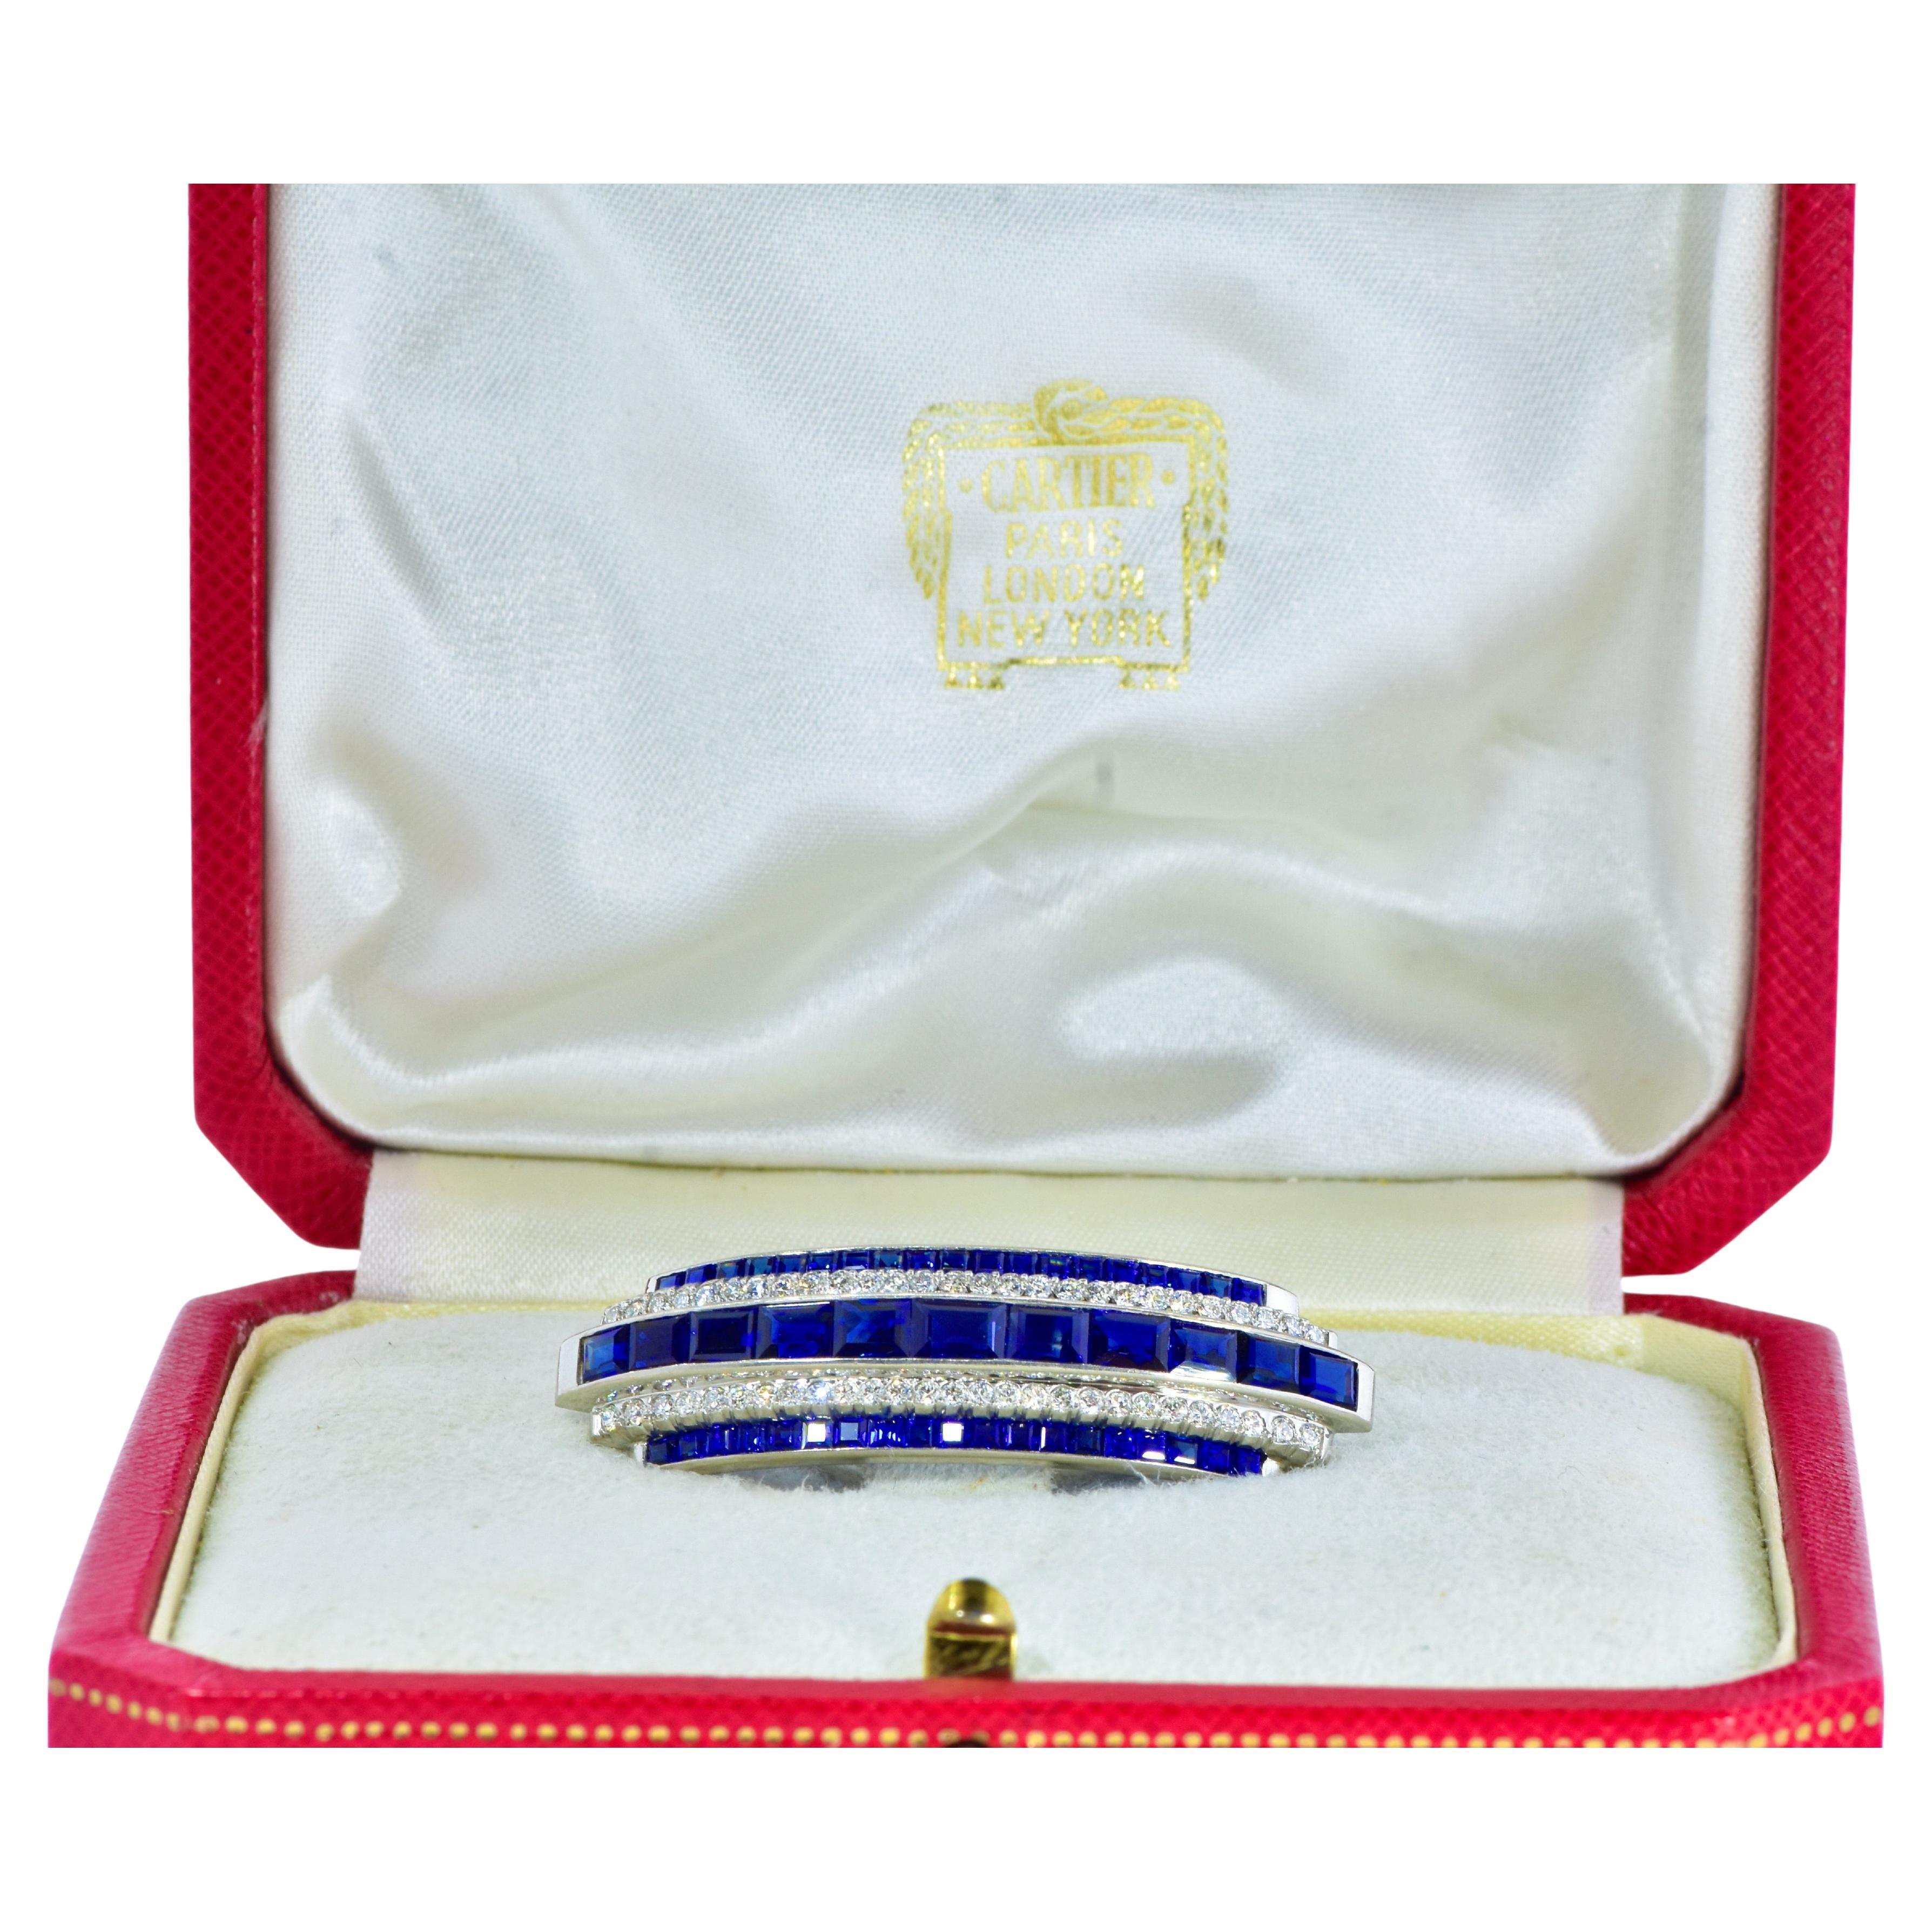 Cartier, signed and numbered, Art Deco Diamond and Sapphire Platinum Antique Brooch and Hair Barrette,   Signed and numbered by Cartier,  this Art Deco jewel is magnificent.  The natural unheated sapphires (probably from Burma), are a bright vivid